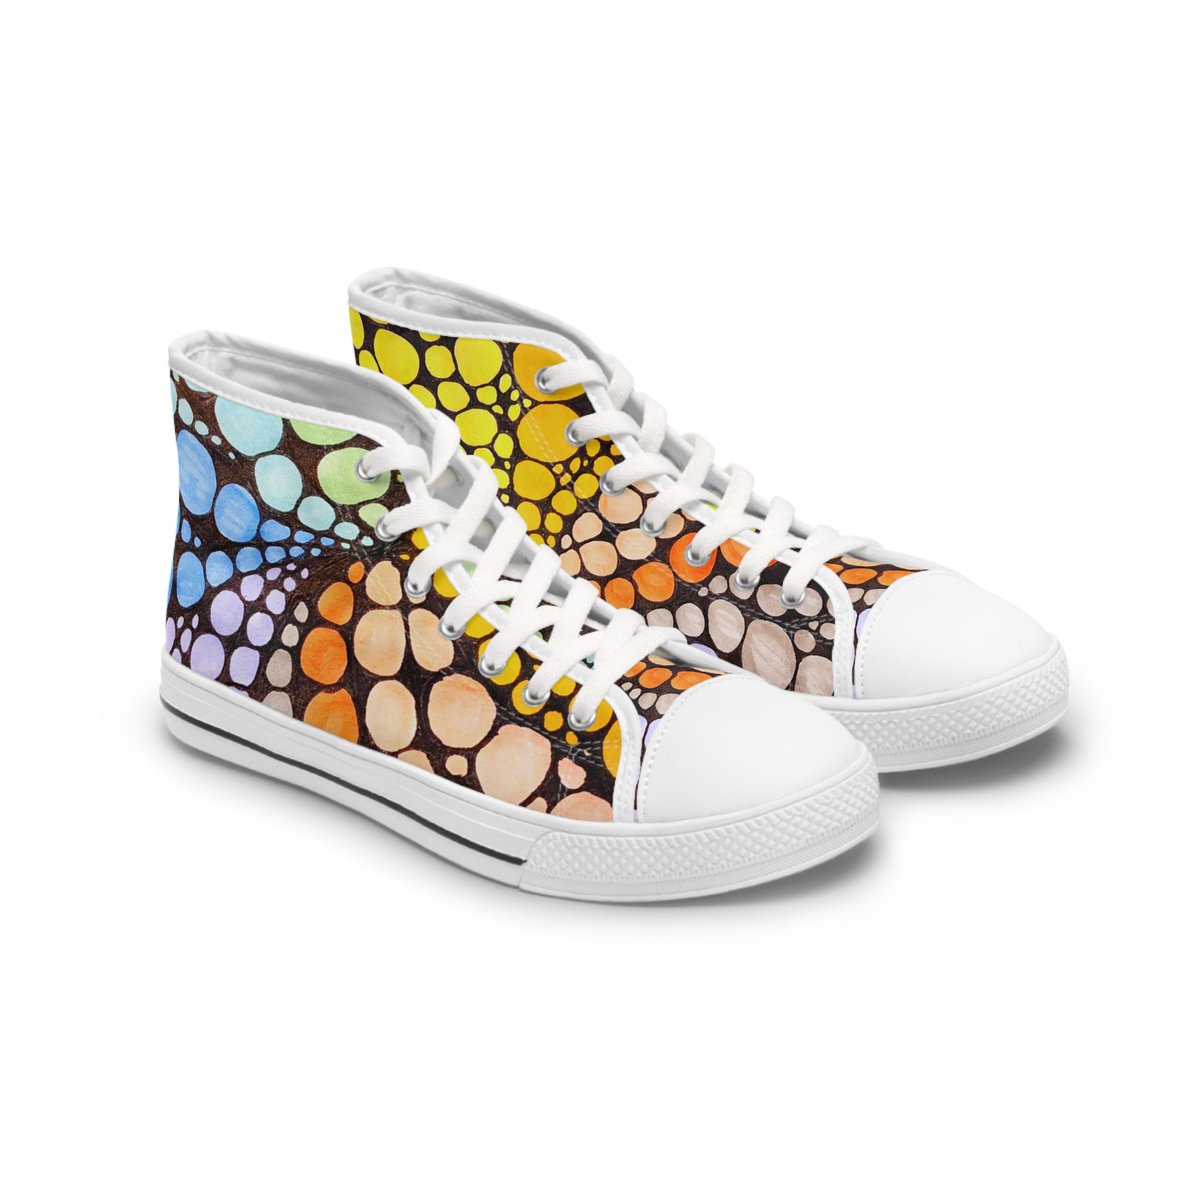 Excited to share the latest addition to my #etsy shop: Dot high-top sneakers, Aesthetic footwear, Rainbow dots, Hand-drawn POD shoes, Multicolor sneakers, gift idea etsy.me/3oLR9HG #canvasshoes #lgbtq #sneakers #summershoes #womanshoe